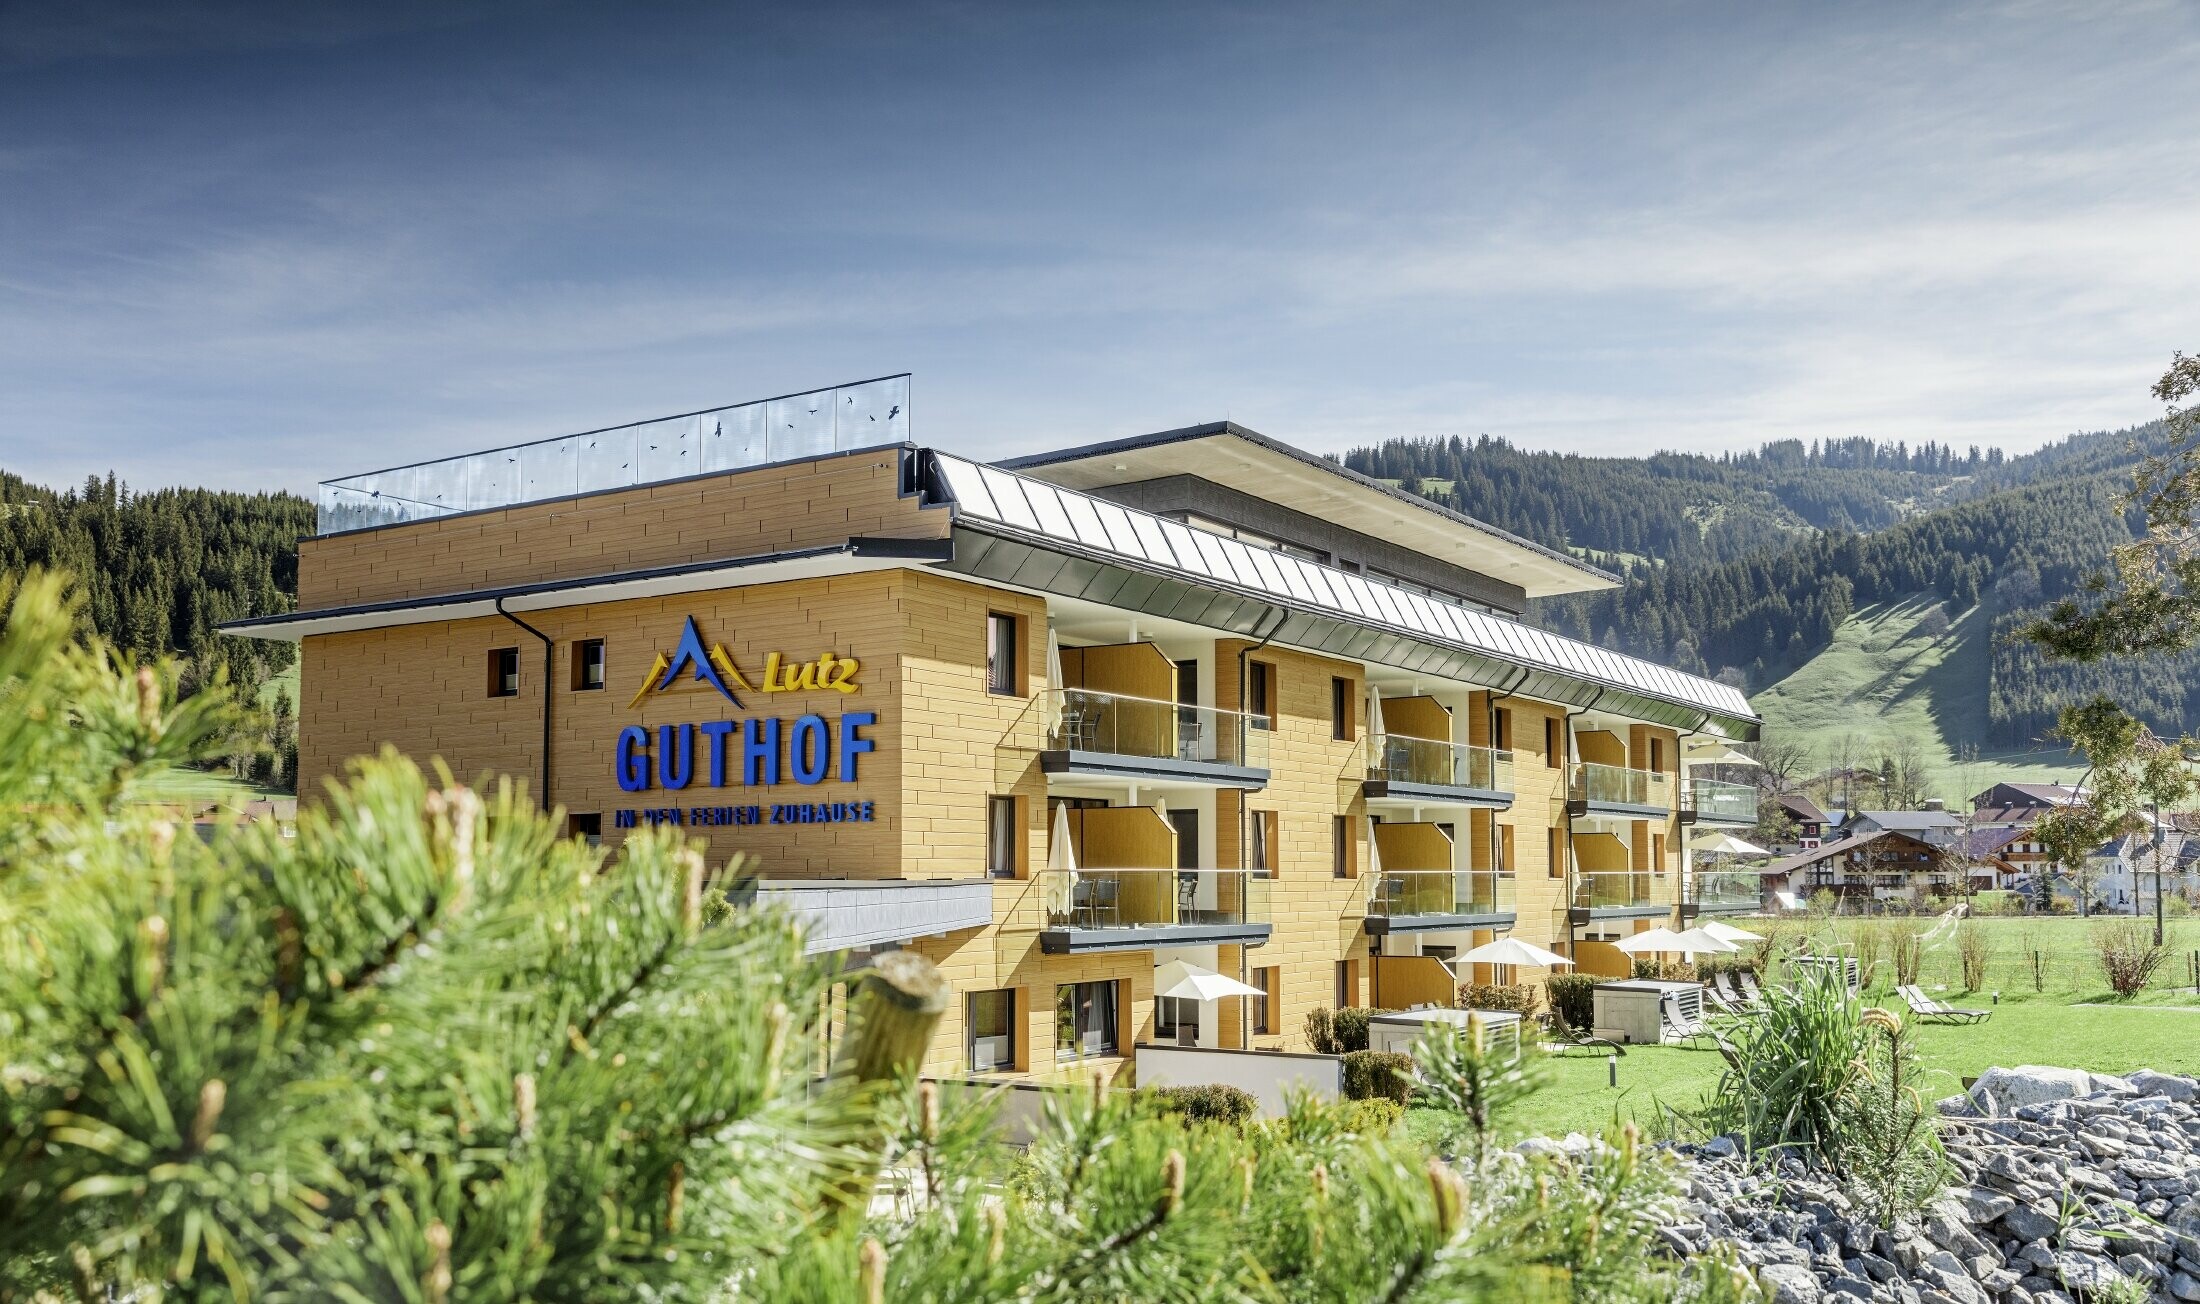 The Guthof Lutz, surrounded by nature, was clad in the PREFA natural oak sidings. The logo of the holiday apartments is displayed on the façade.